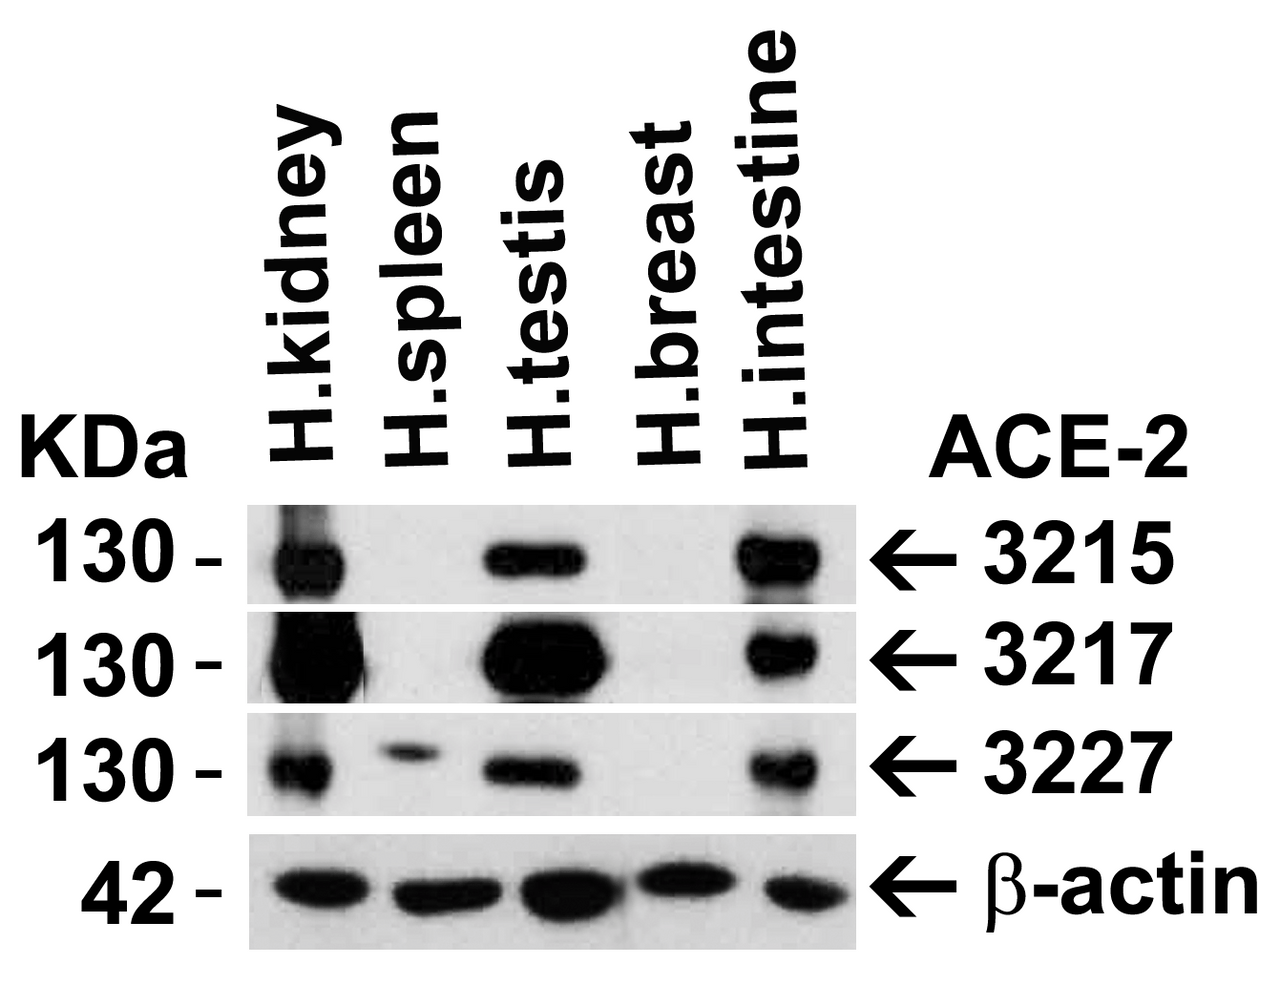 Figure 1 Independent Antibody Validation (IAV) via Protein Expression Profile in Human Tissues
Loading: 15 &#956;g of lysates per lane.
Antibodies: ACE2, 3215 (2 &#956;g/mL) , ACE2, 3217 (2 &#956;g/mL) , ACE2, 3227 (2 &#956;g/mL) and beta-actin 3779 (1 &#956;g/mL) , 1h incubation at RT in 5% NFDM/TBST.
Secondary: Goat anti-rabbit IgG HRP conjugate at 1:10000 dilution.